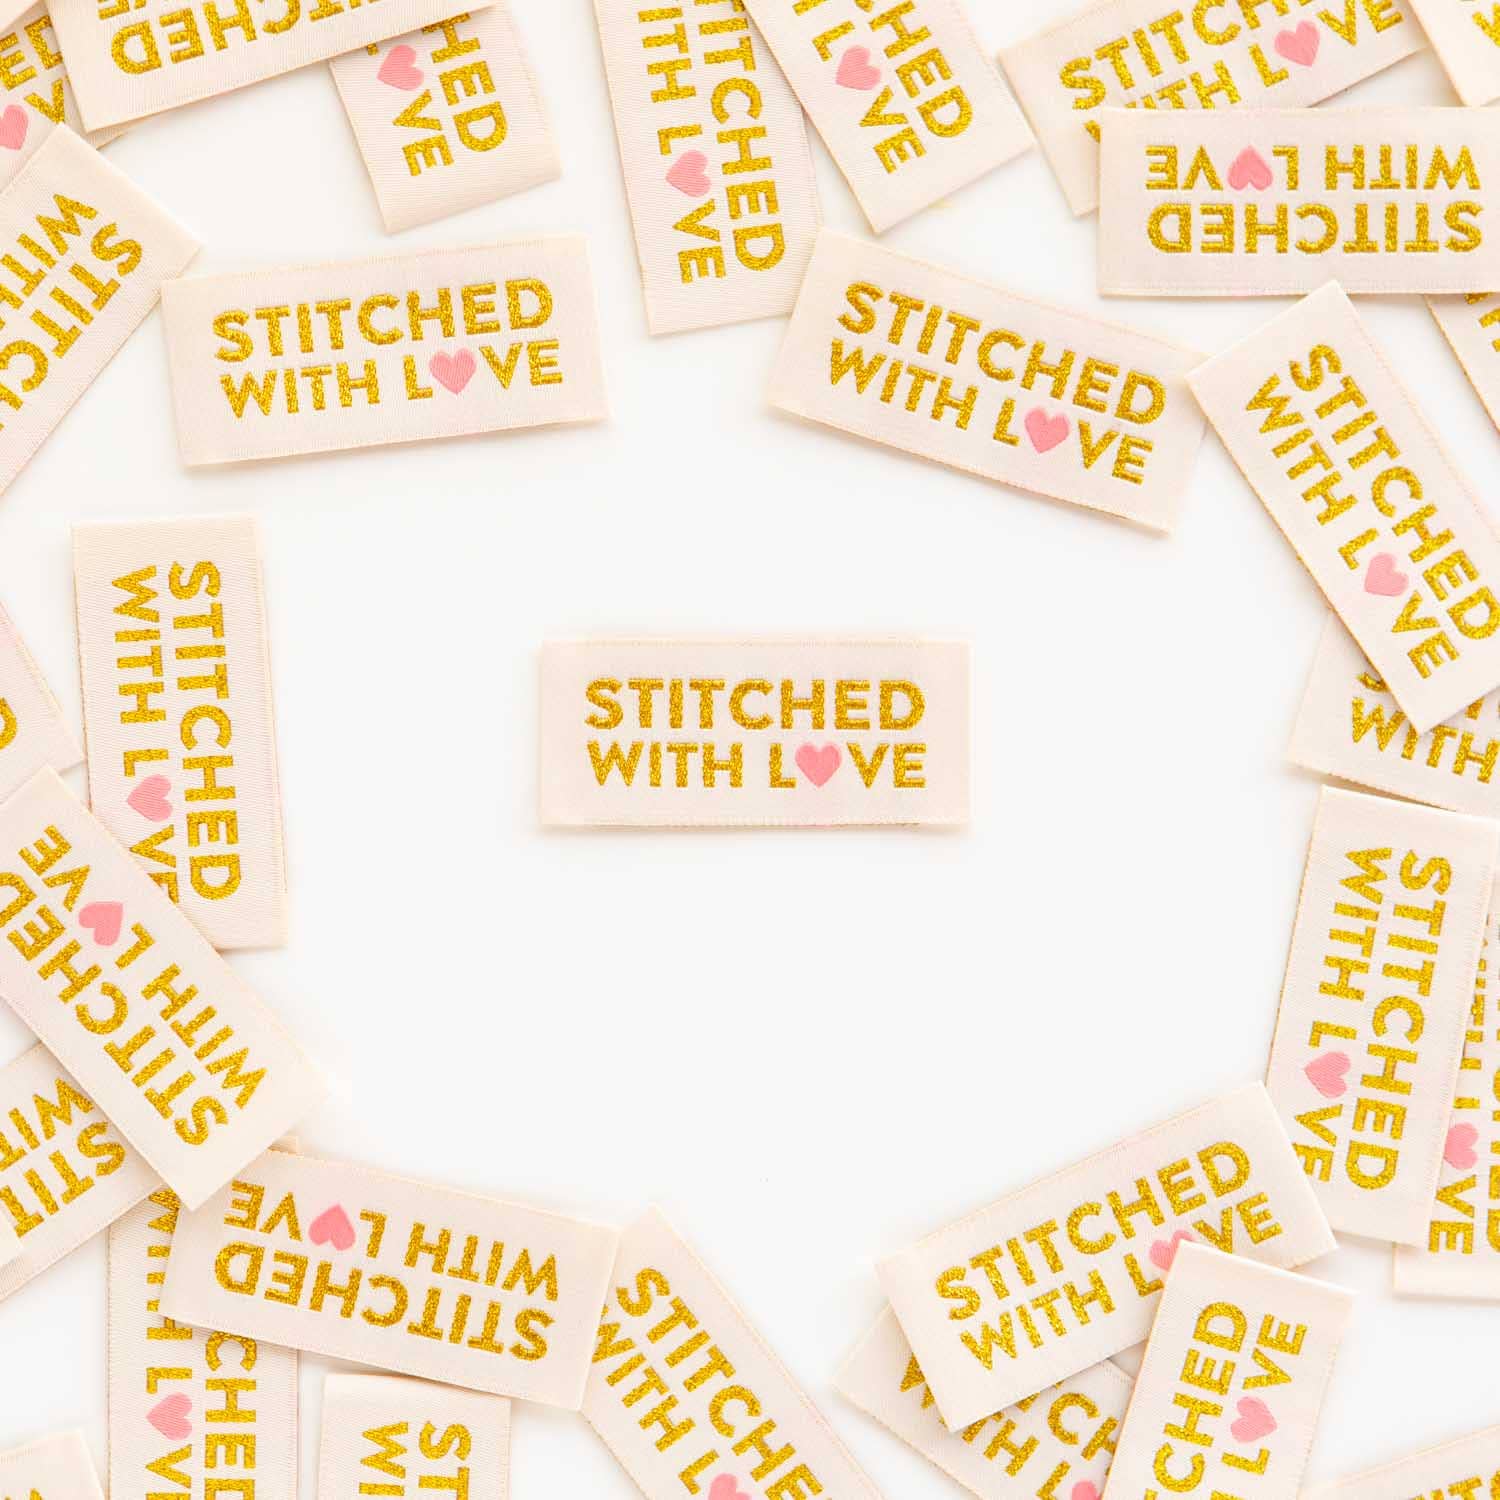 Stitched with Love Woven Labels  - Sewing Woven Clothing Tag - homesewn